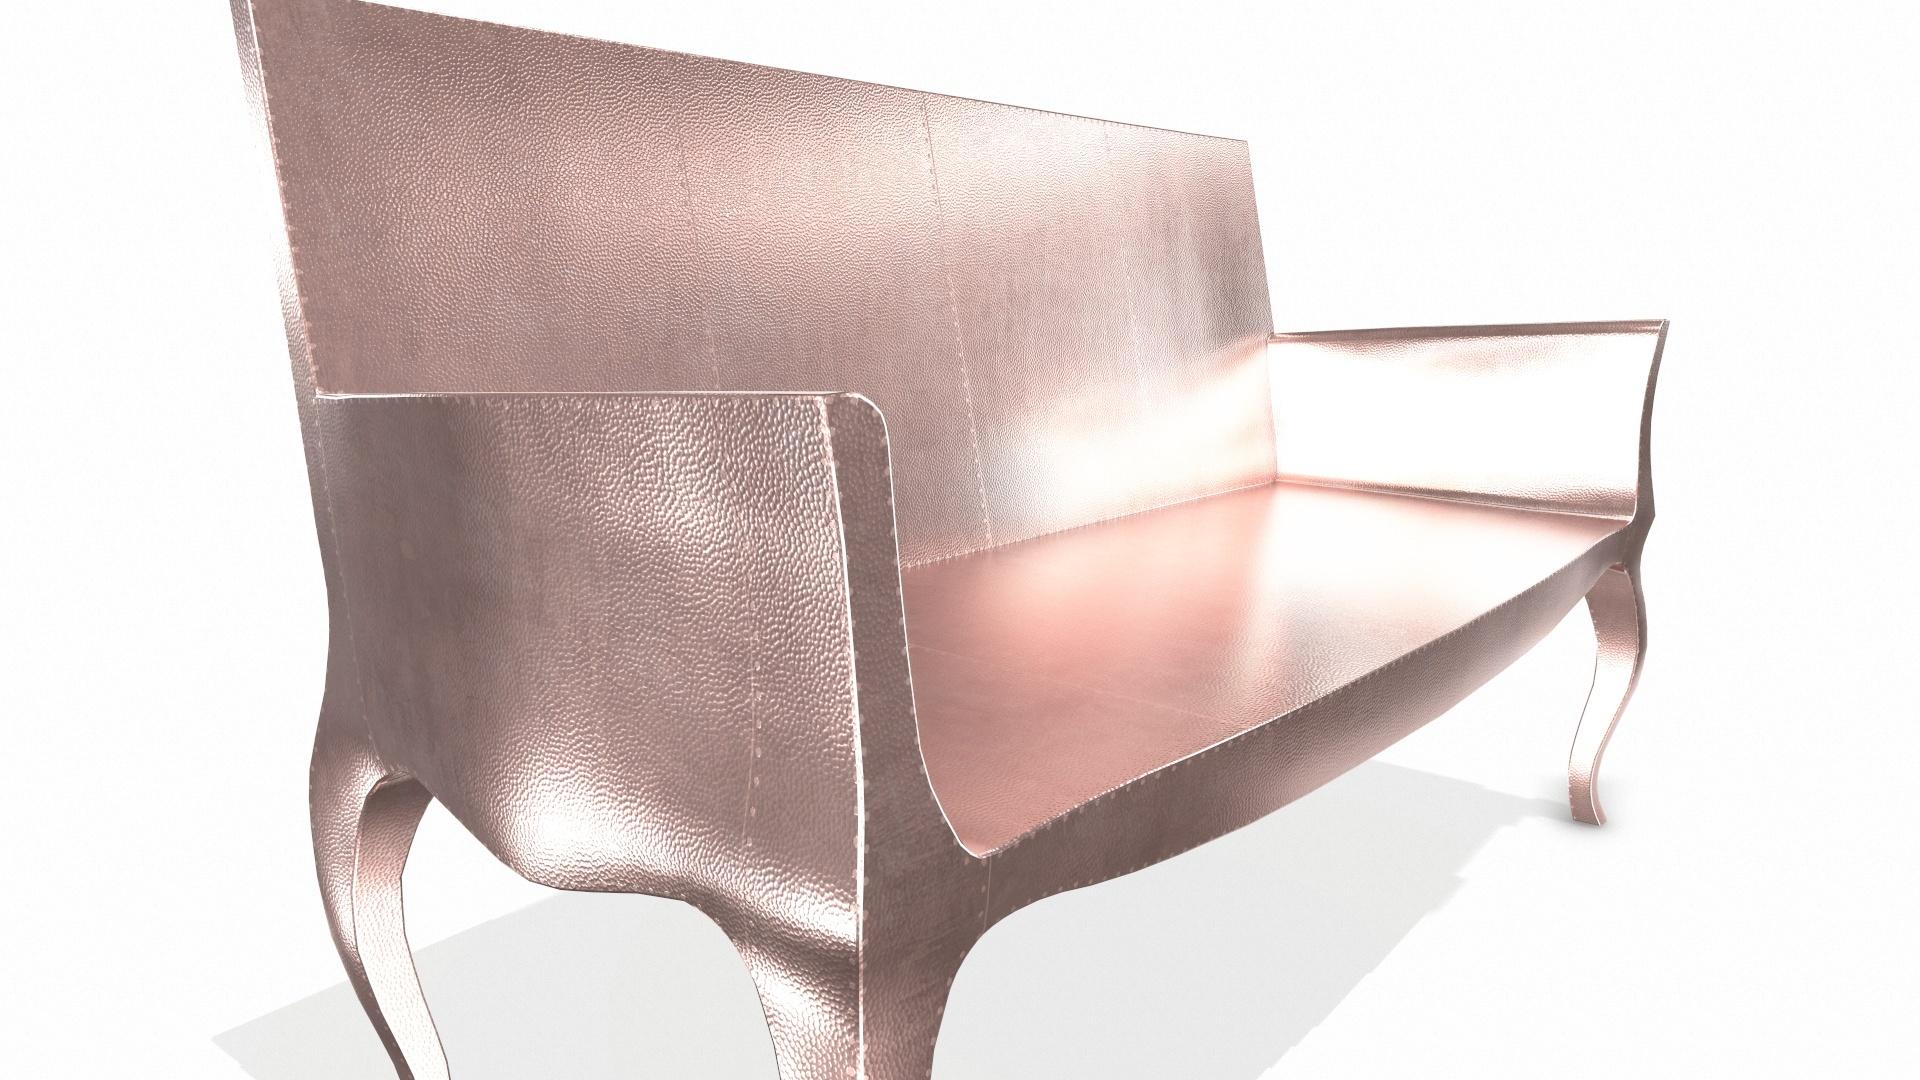 Metal Louise Settee Art Deco Lounge Chairs in Mid. Hammered Copper by Paul Mathieu For Sale